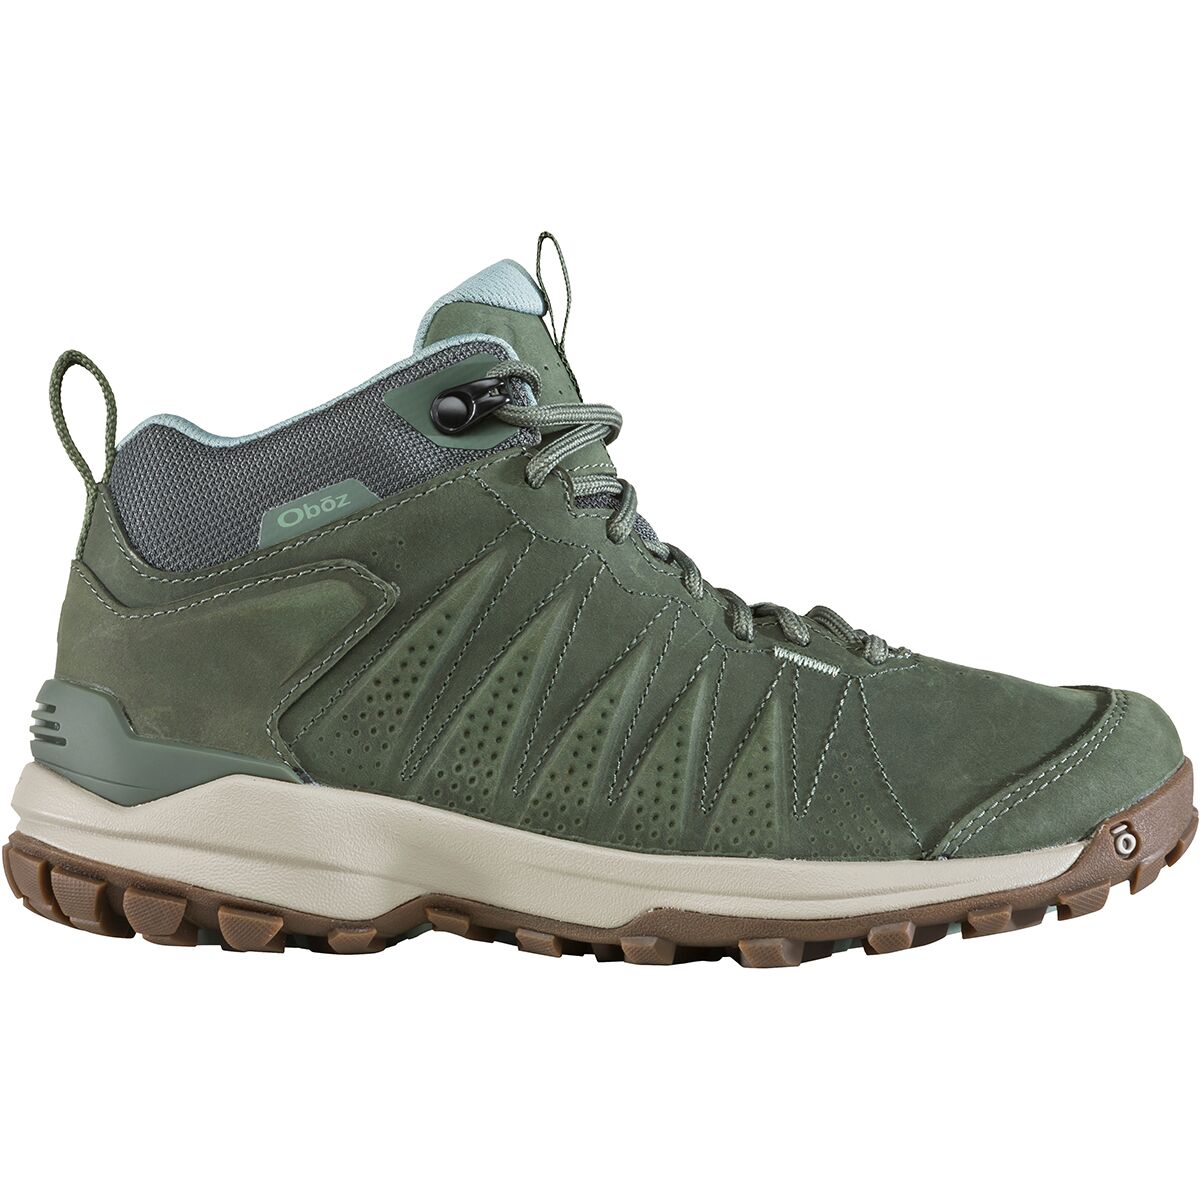 Sypes Mid Leather B-DRY Hiking Boot - Women